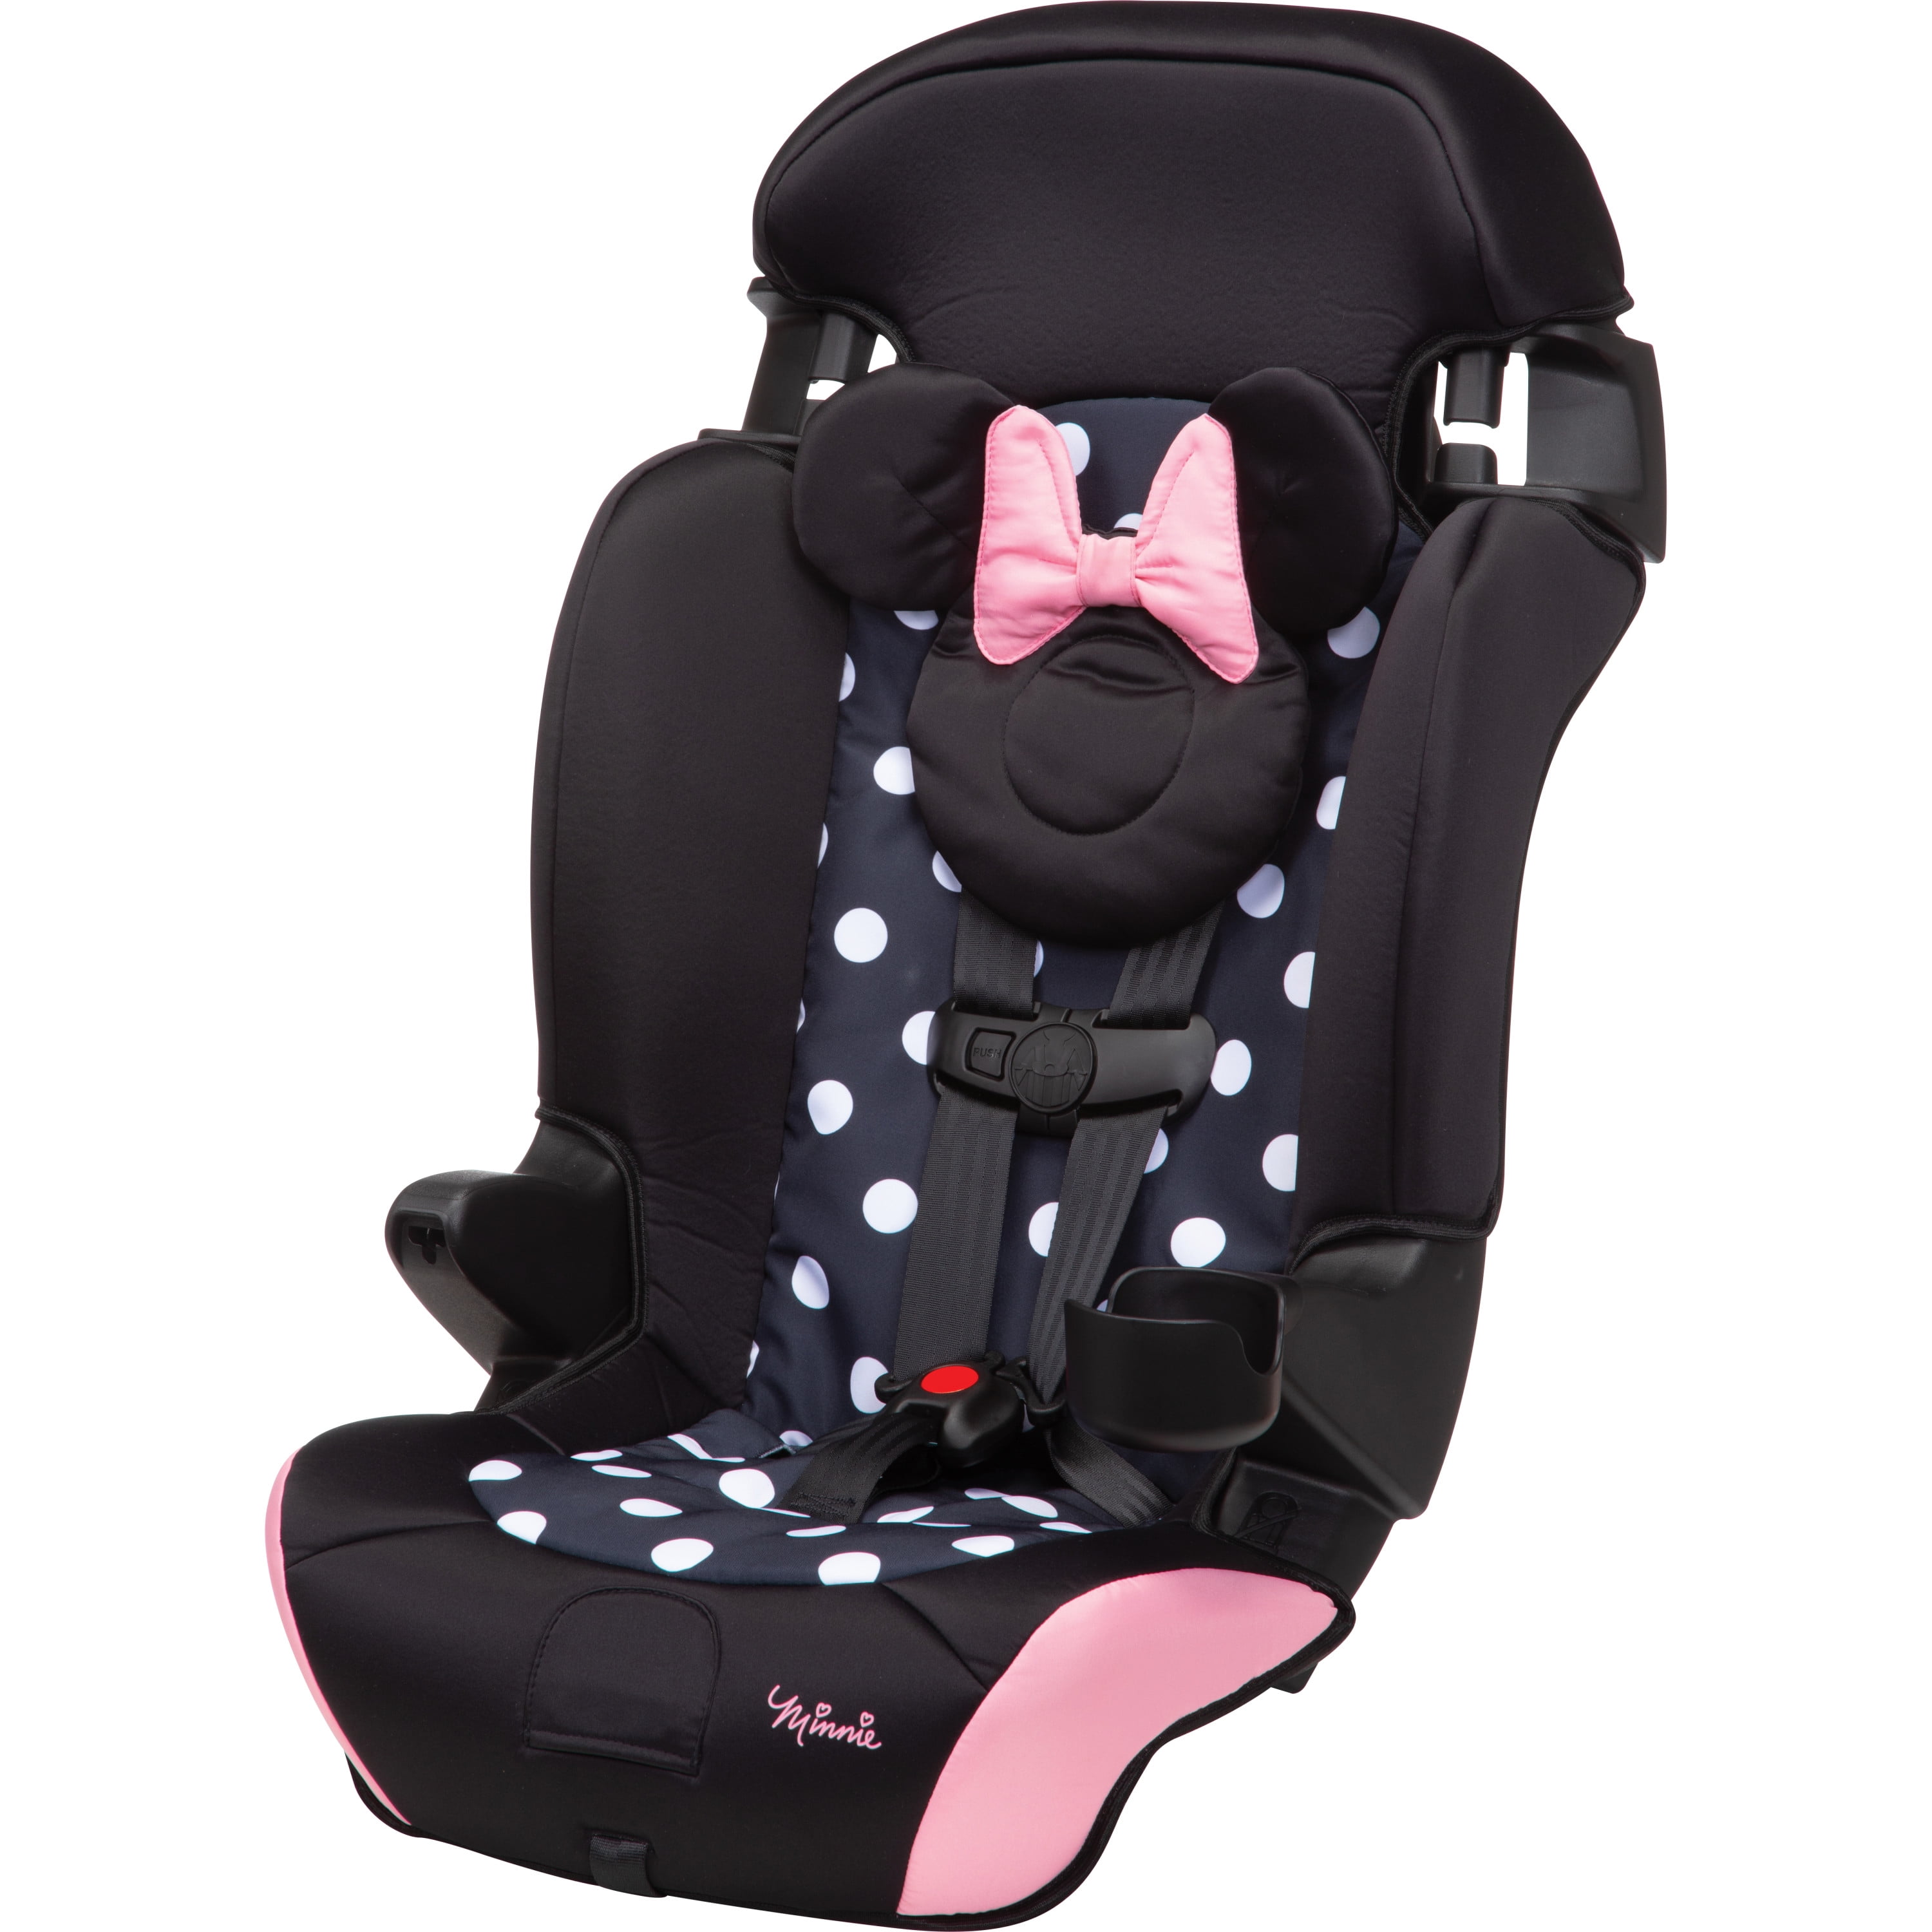 Minnie Mouse Car Seat Convertible Girls Forward Rear Facing Booster Disney Baby 